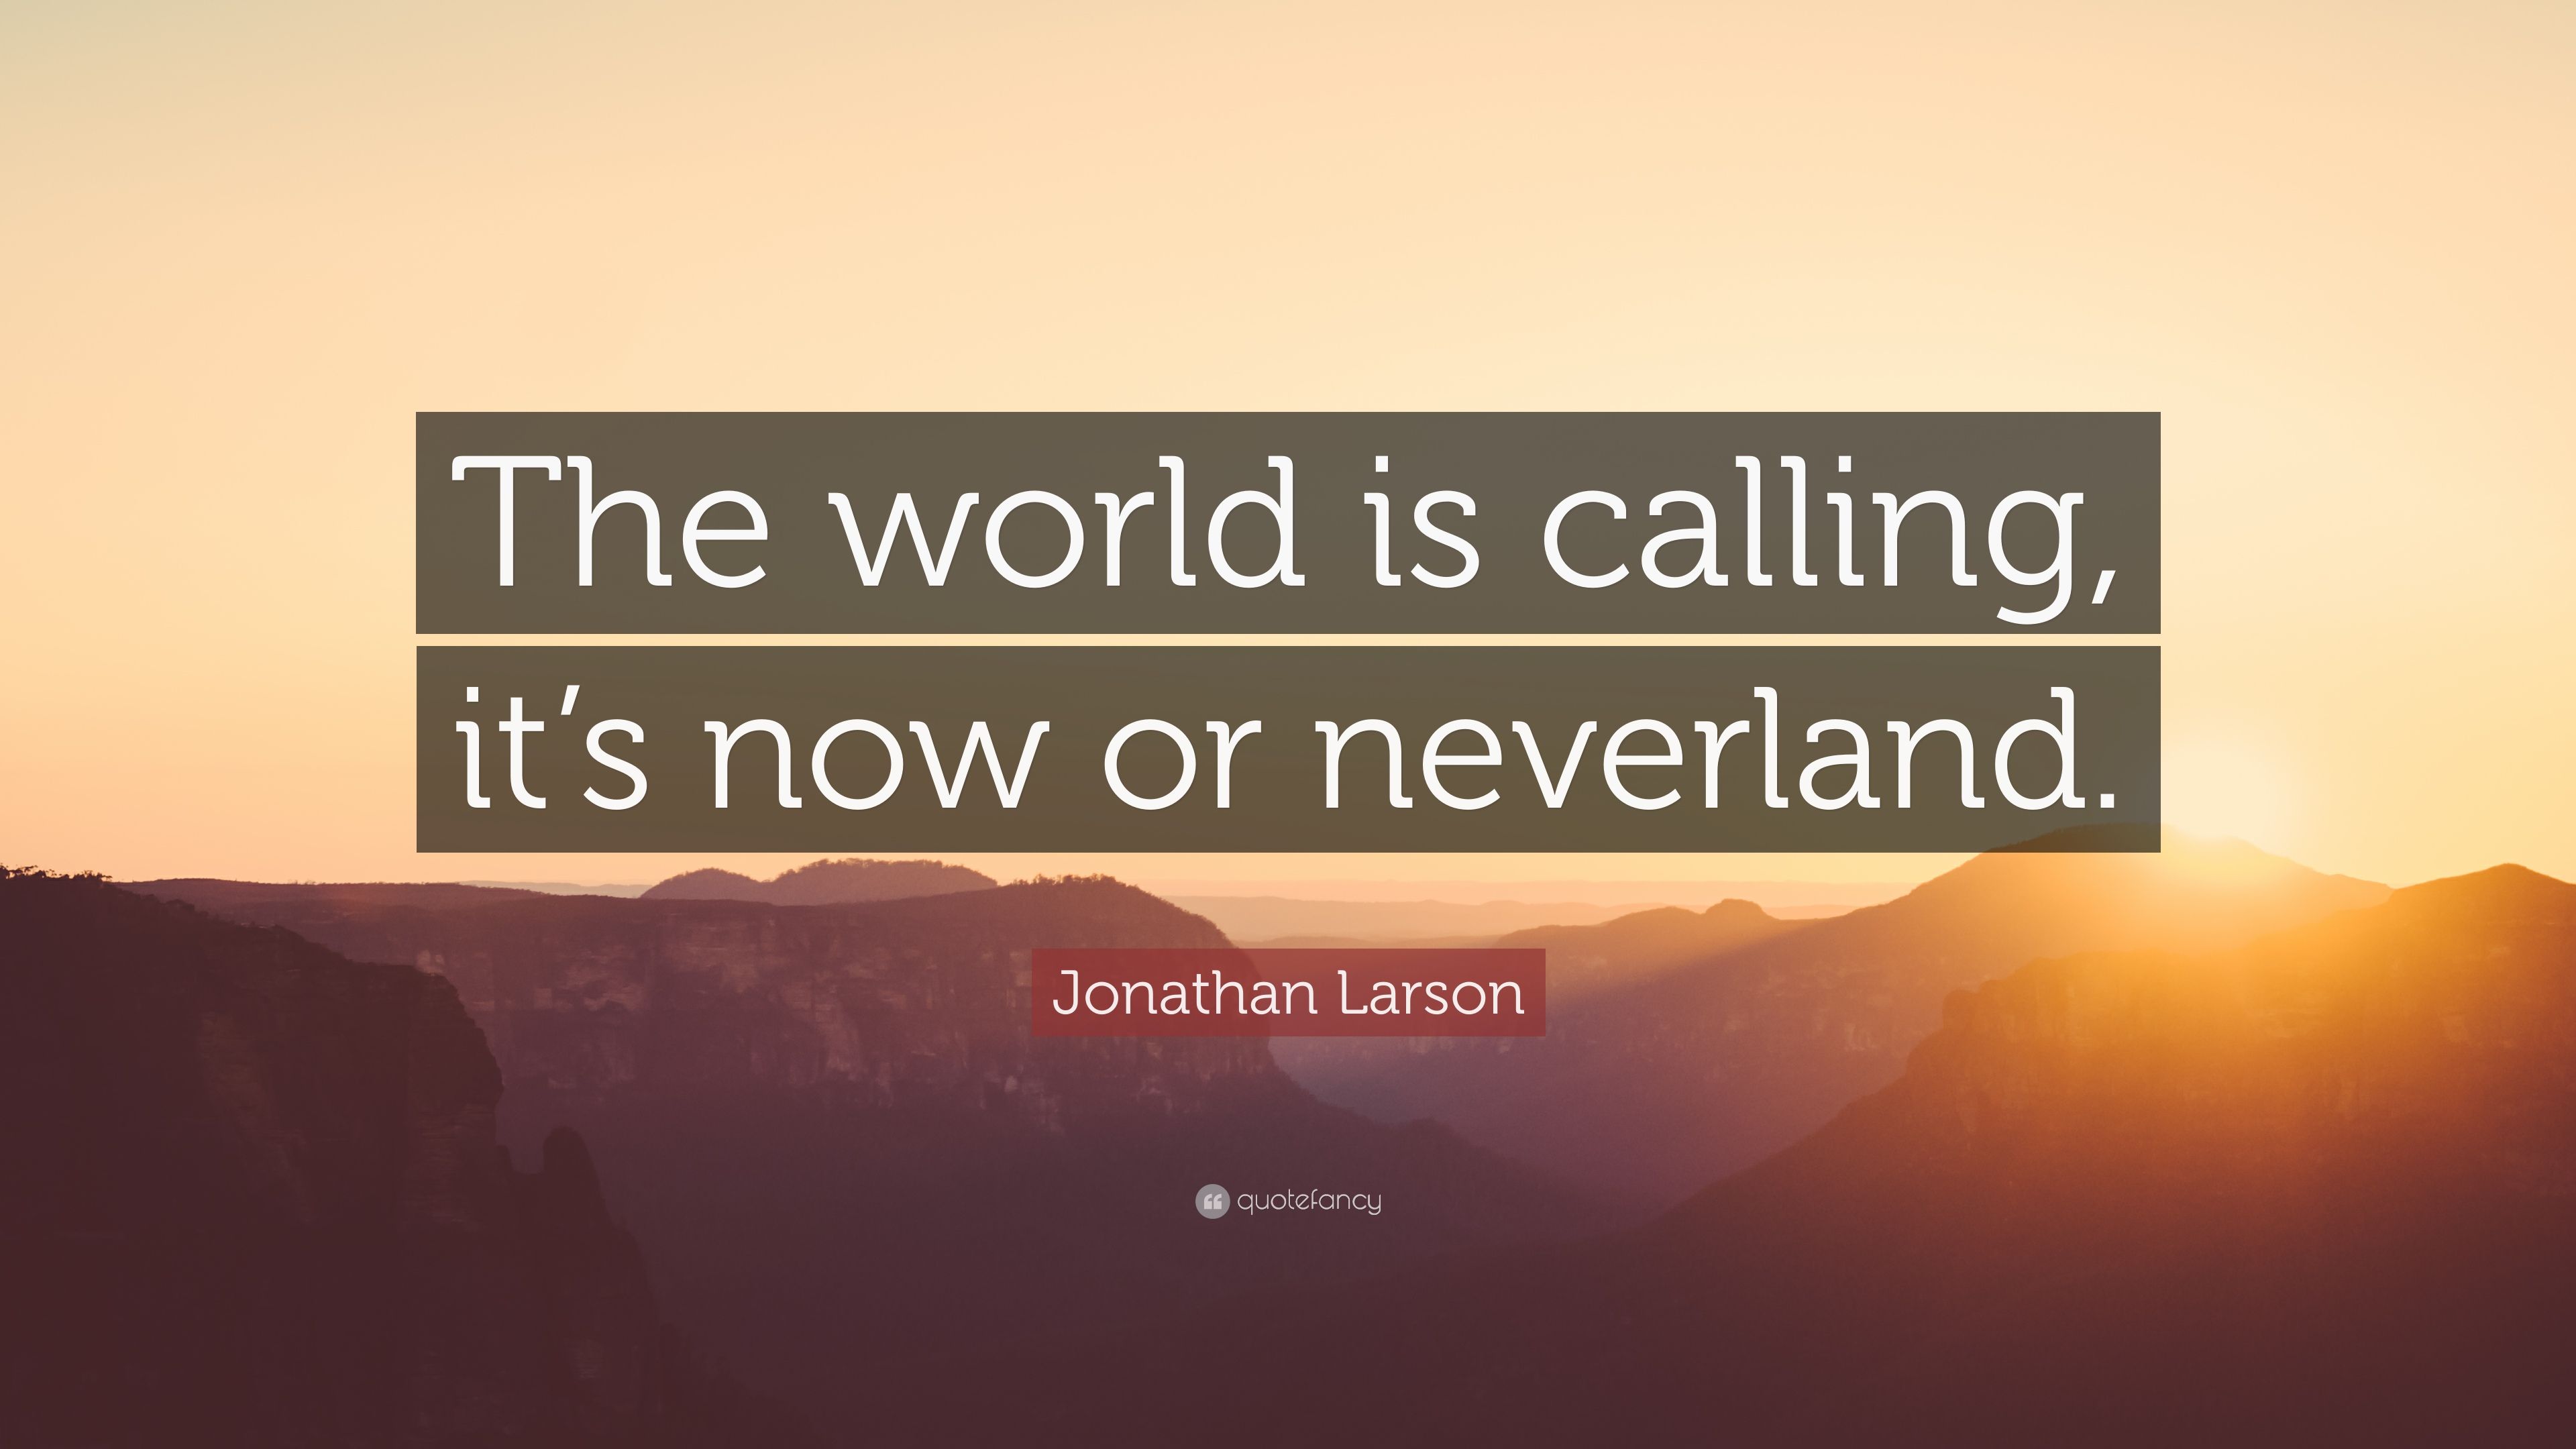 Jonathan Larson Quote: “The world is calling, it's now or neverland.” (10 wallpaper)